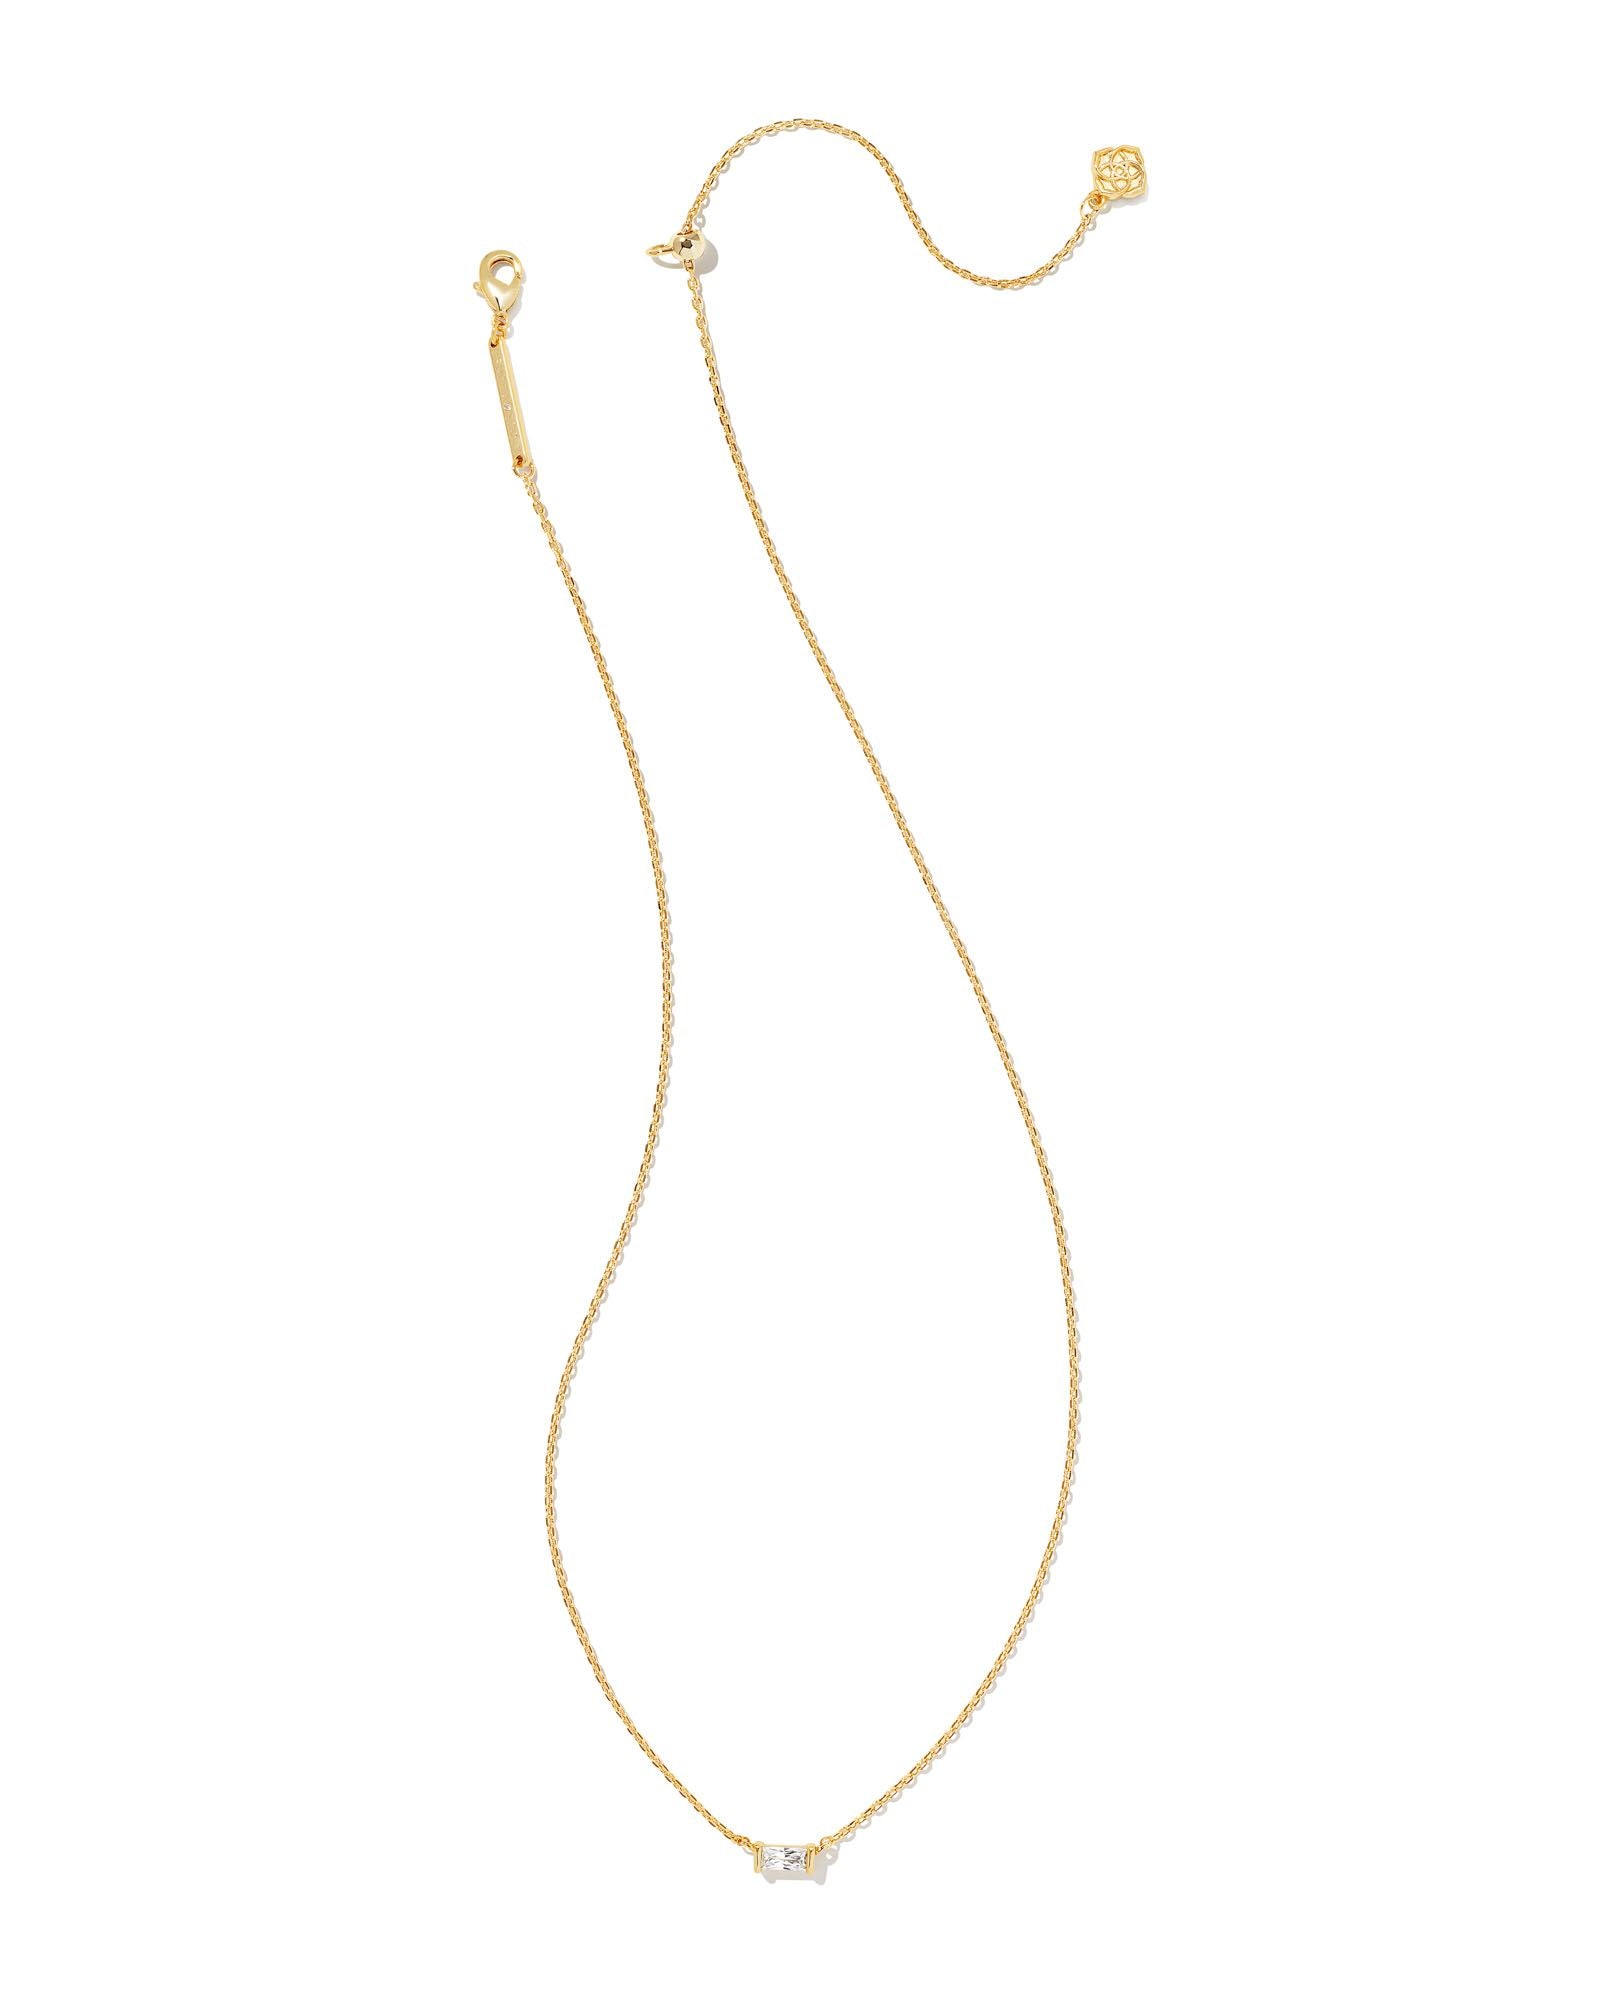 Juliette Pendant Necklace in Gold White Crystal